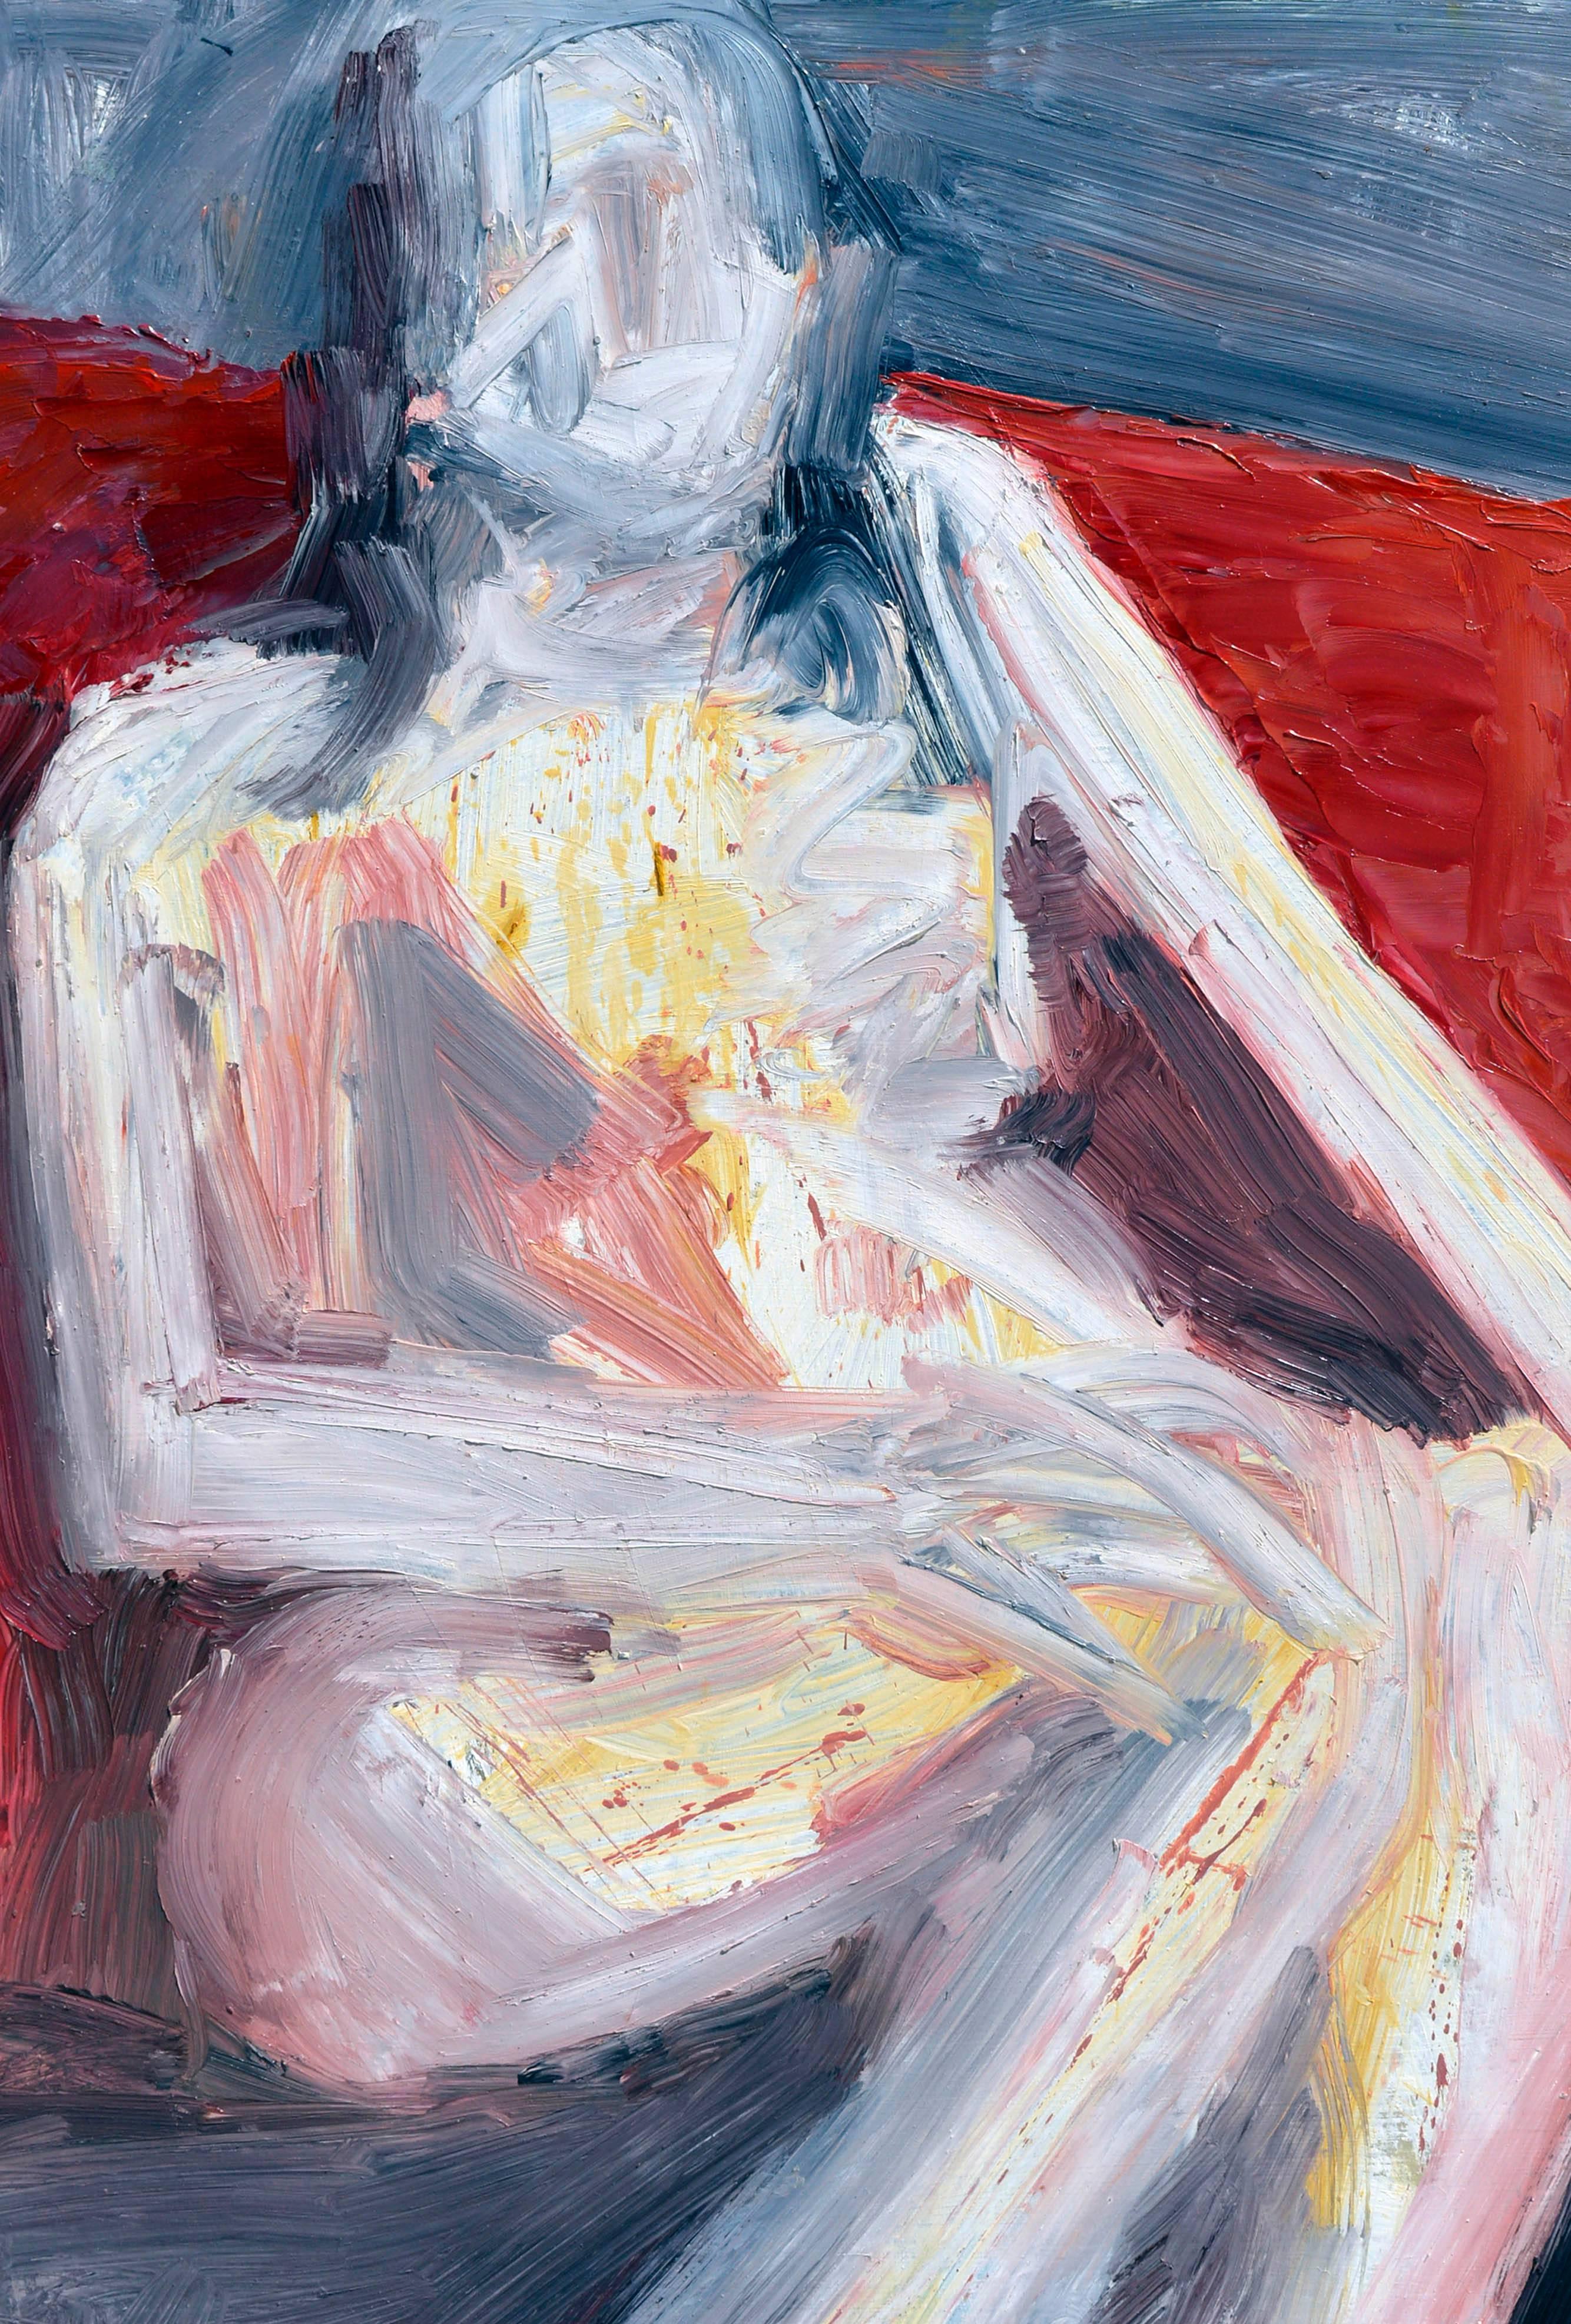  Abstract Expressionism --Seated Woman Figurative - Painting by Daniel David Fuentes